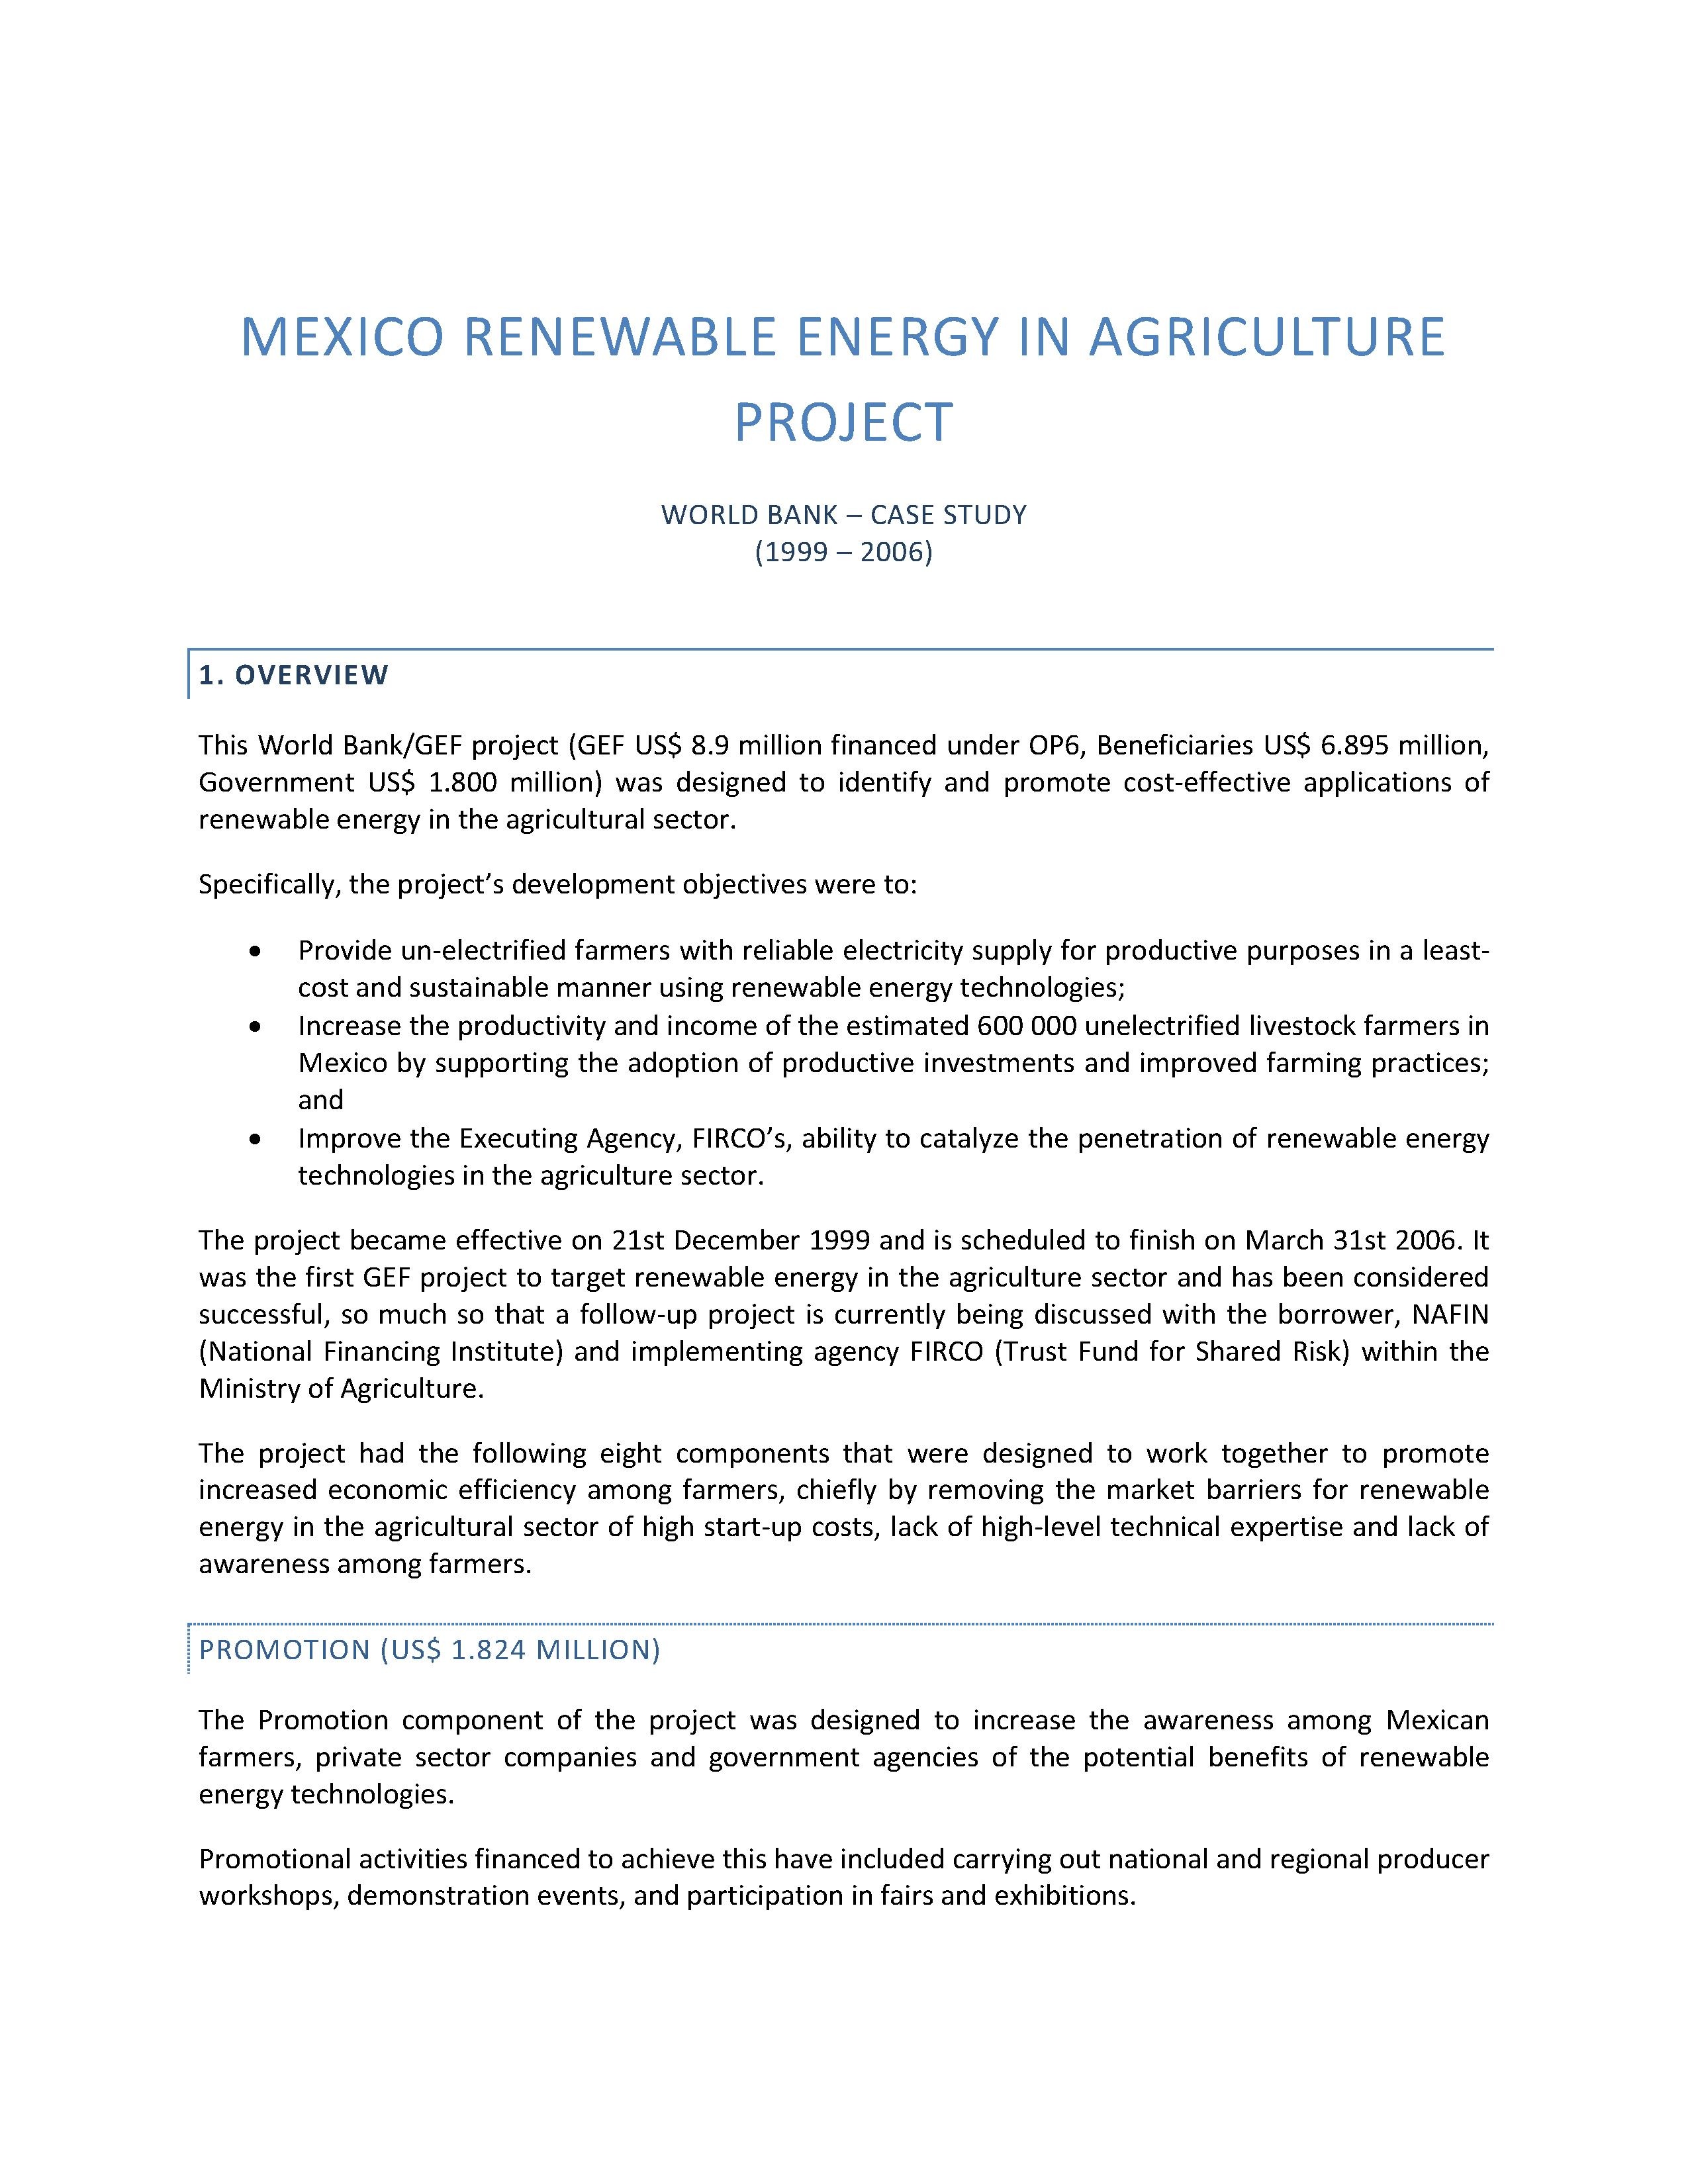 Renewable Energy in Agriculture Project Mexico